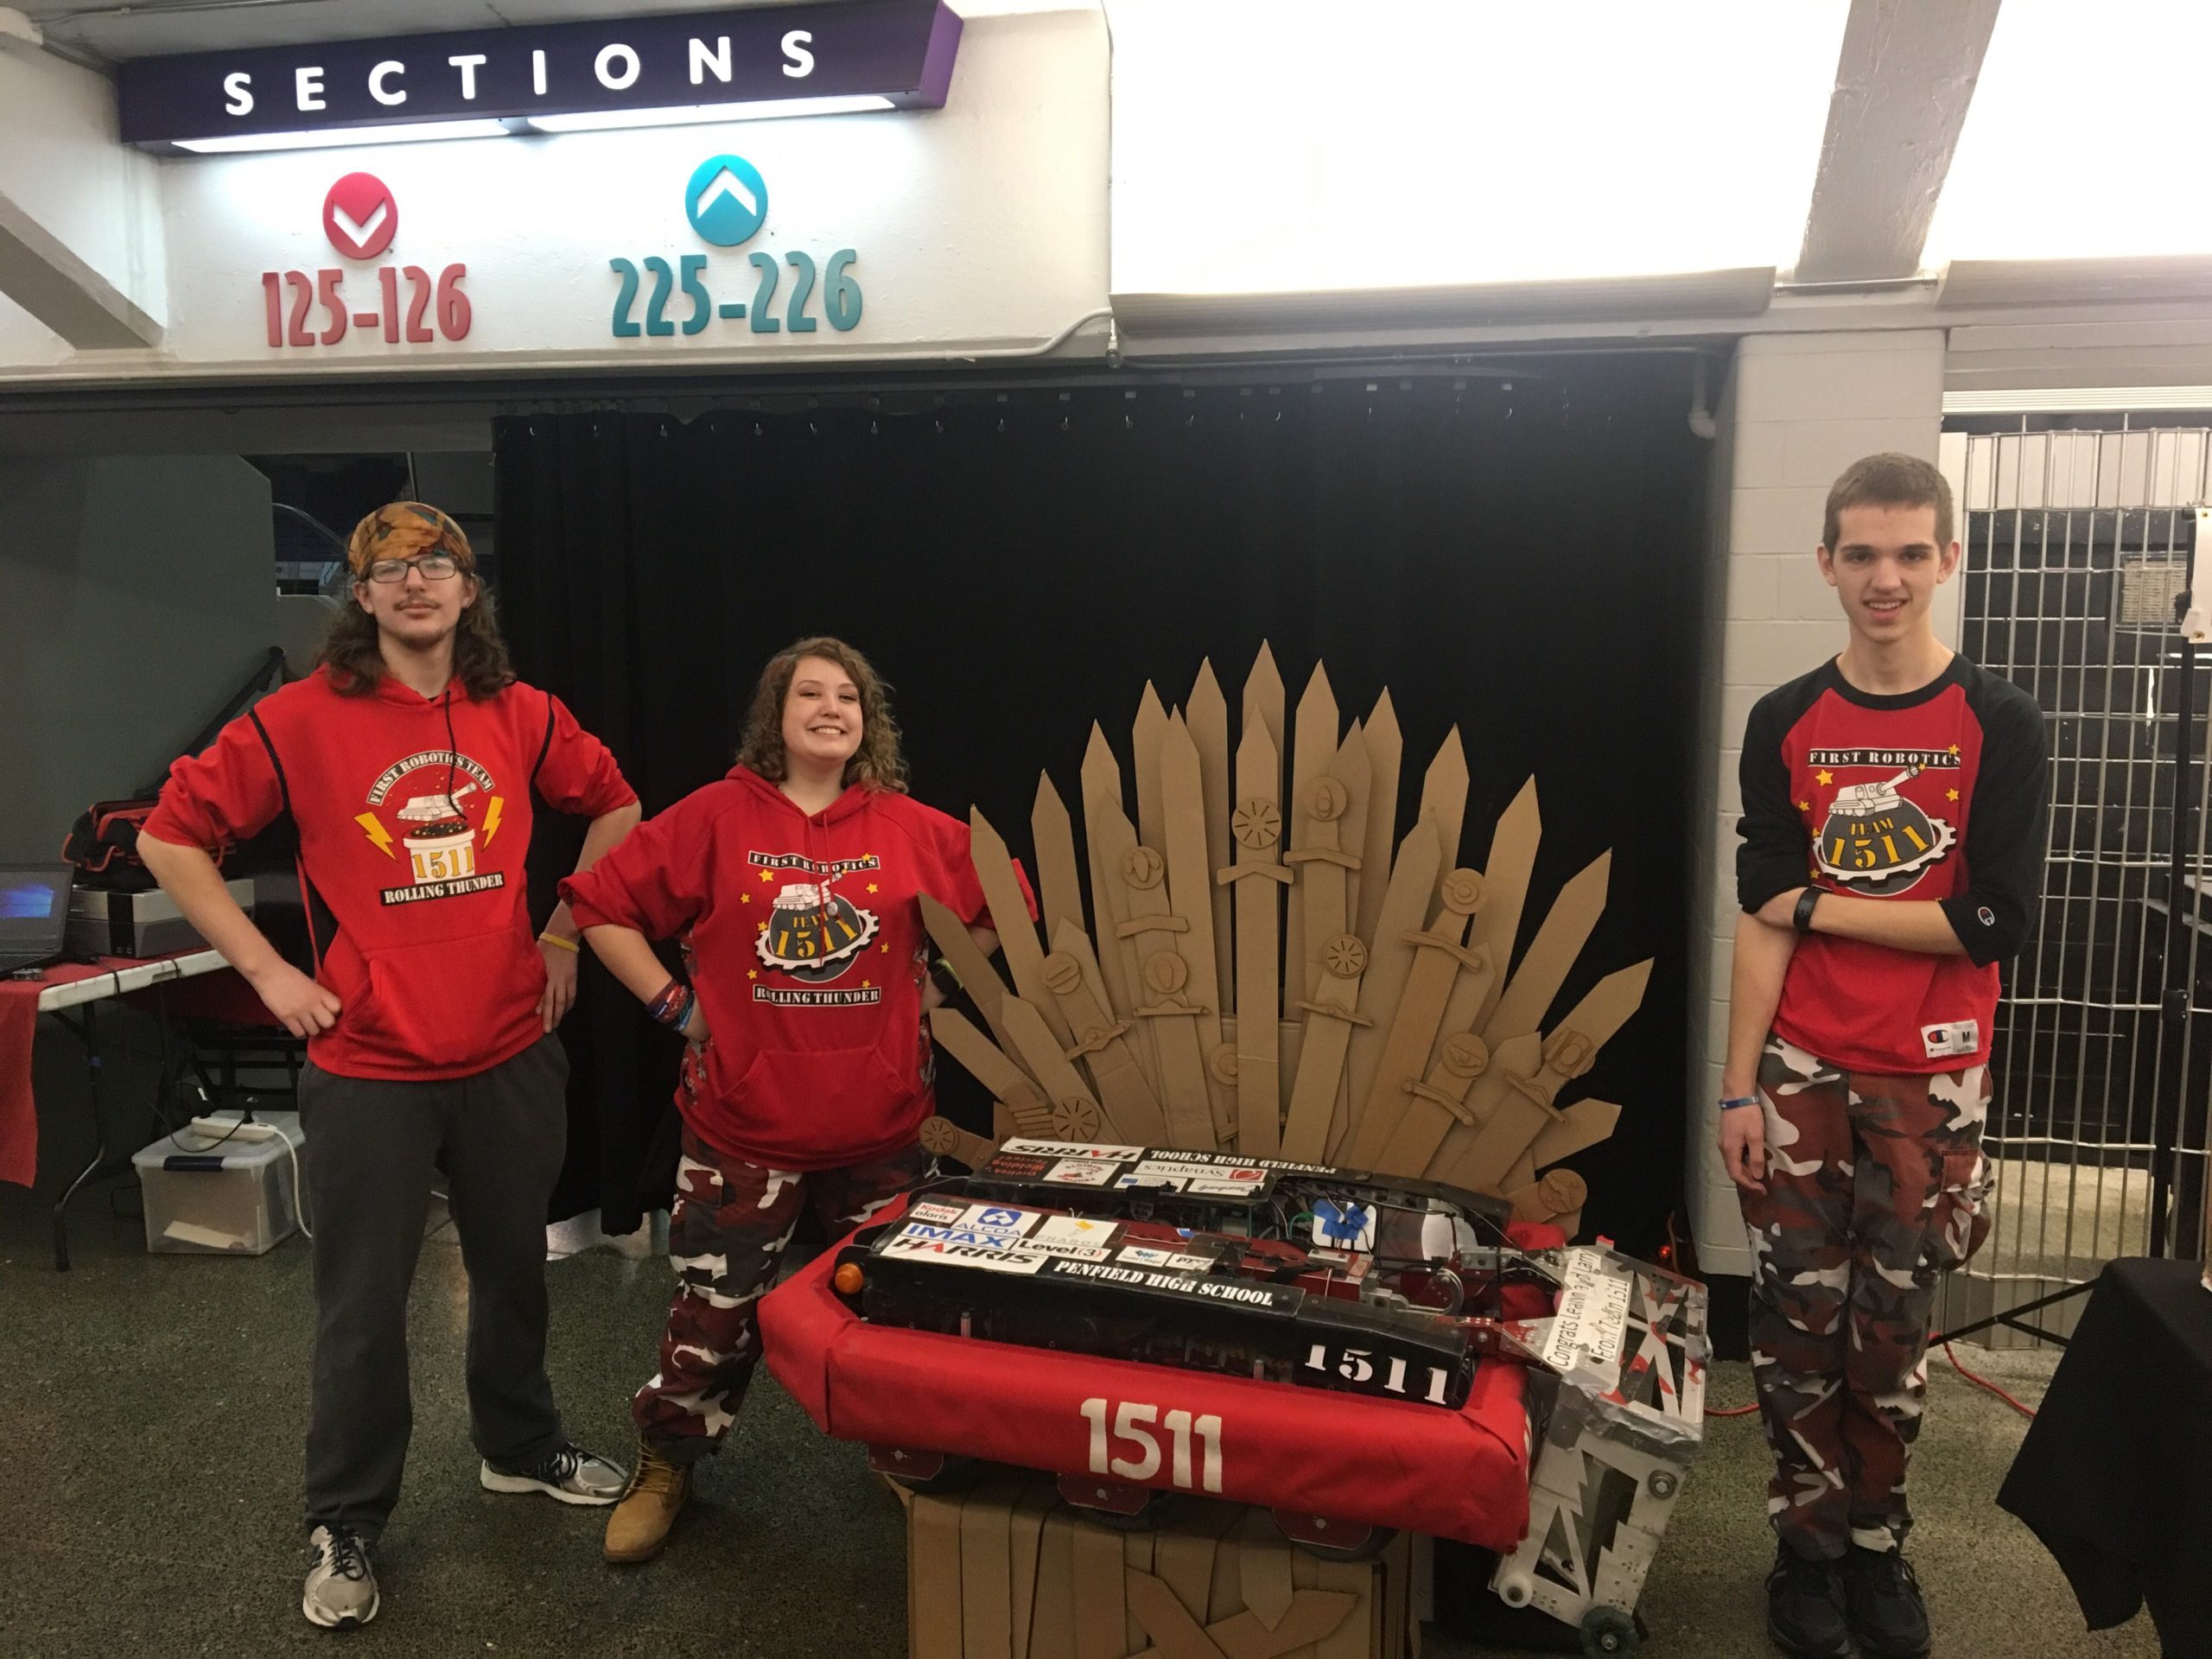 3 team members posing with robot sitting on a cardboard throne at Comic Con